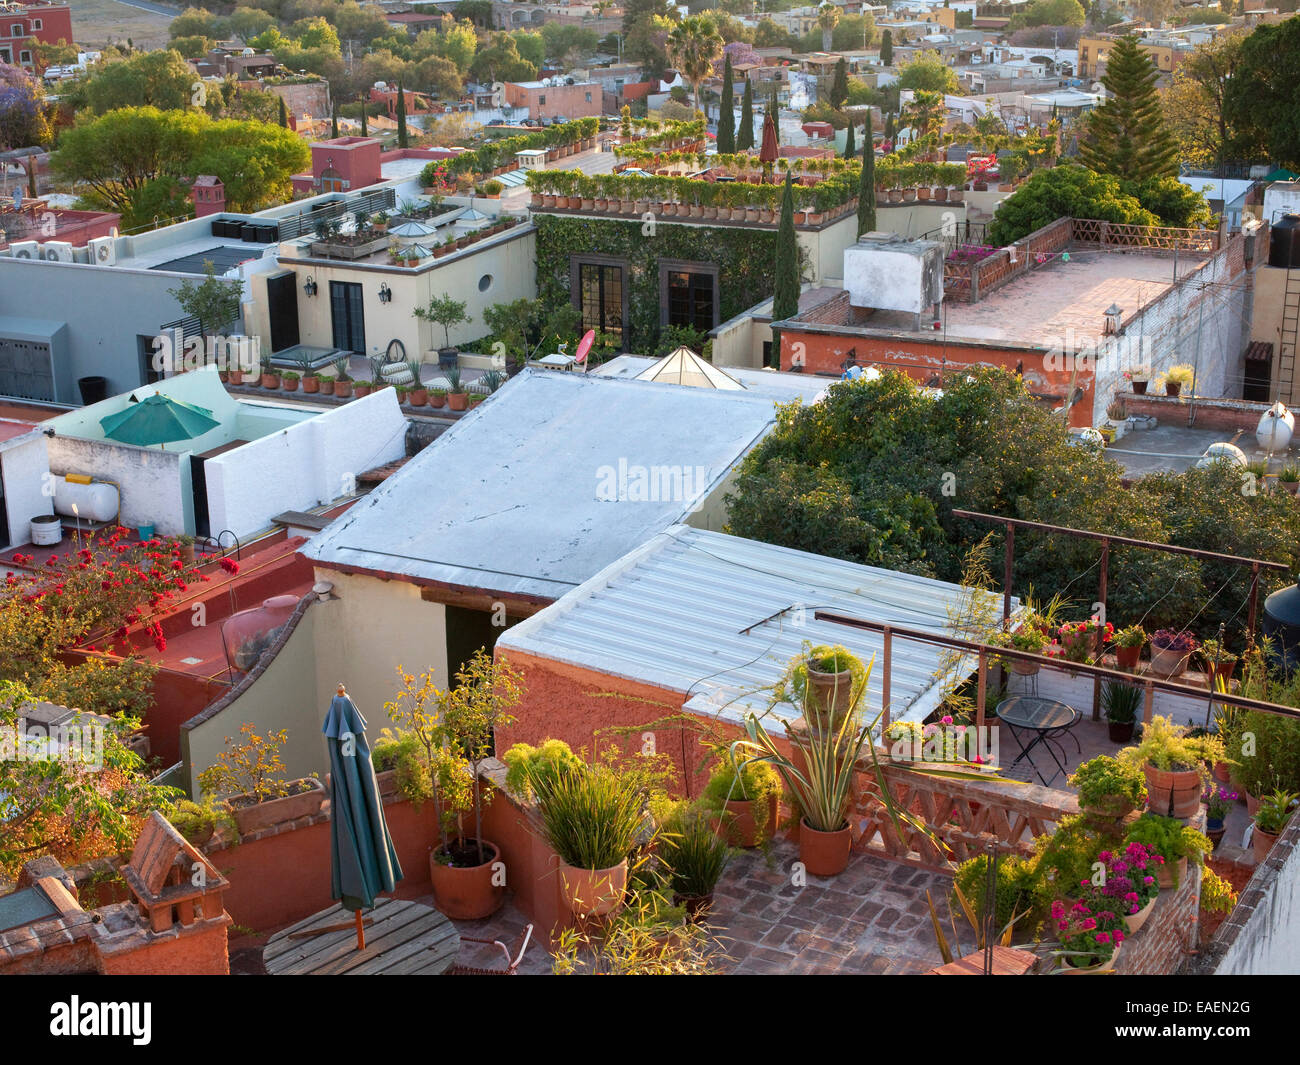 View of Roof Gardens and patios in Mexican Village Stock Photo